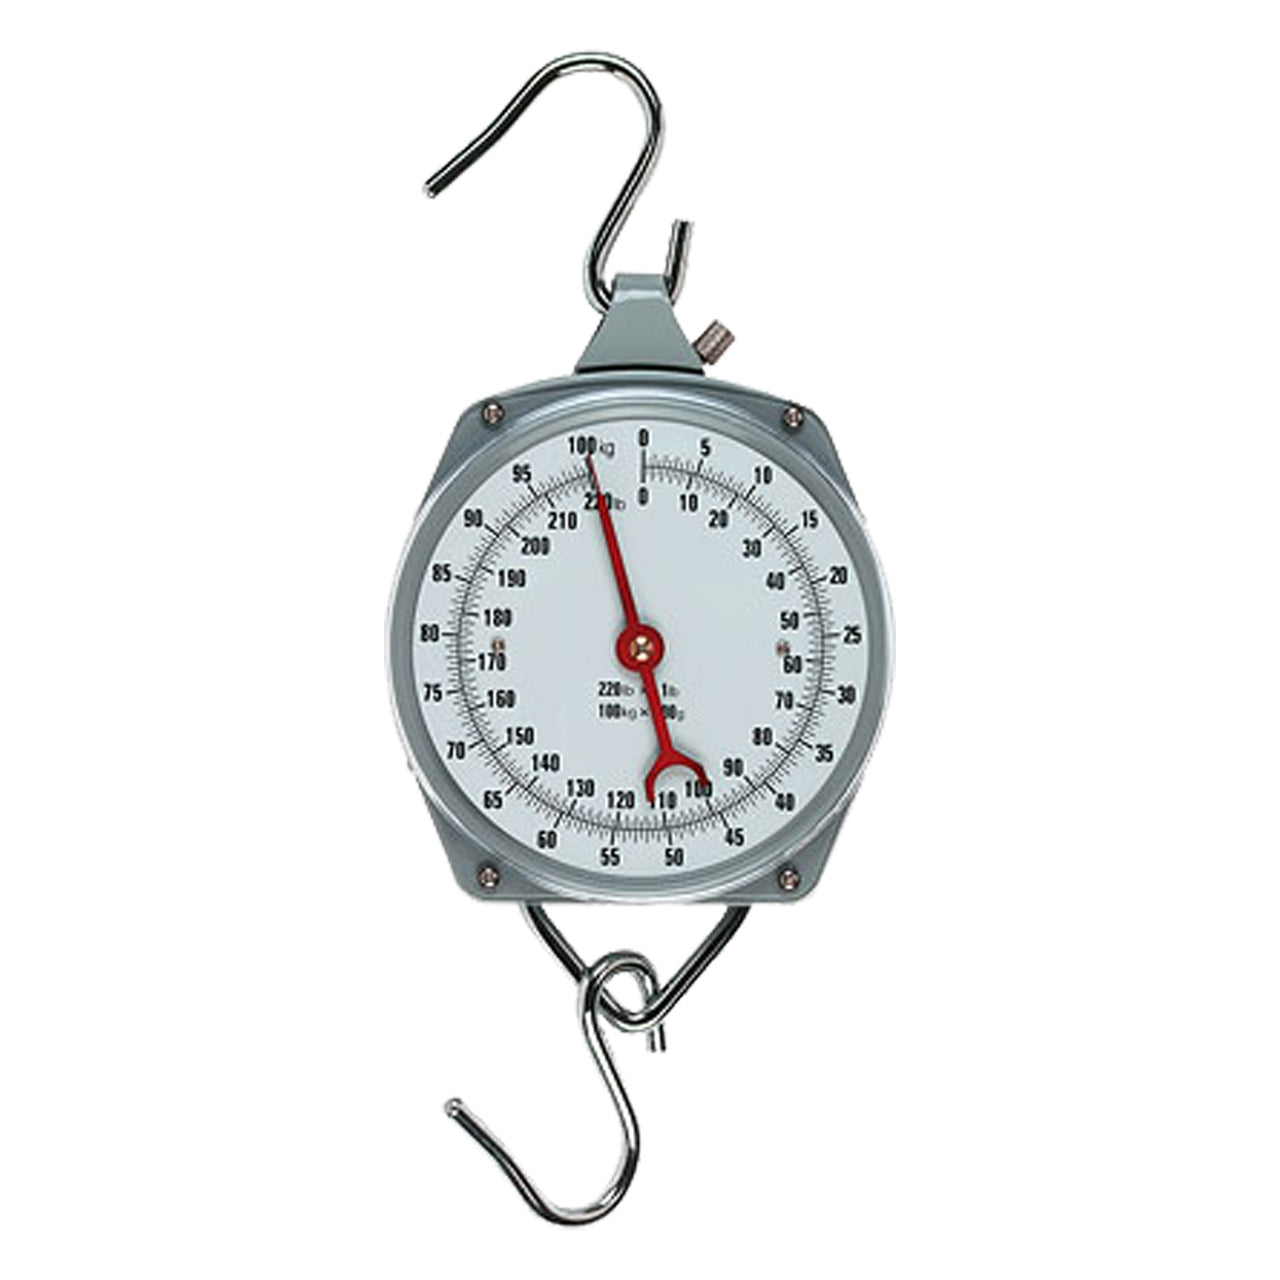 Kerbl Suspended Dial Balance 100 Kg - Weigh Slings Scales Kerbl - Canada